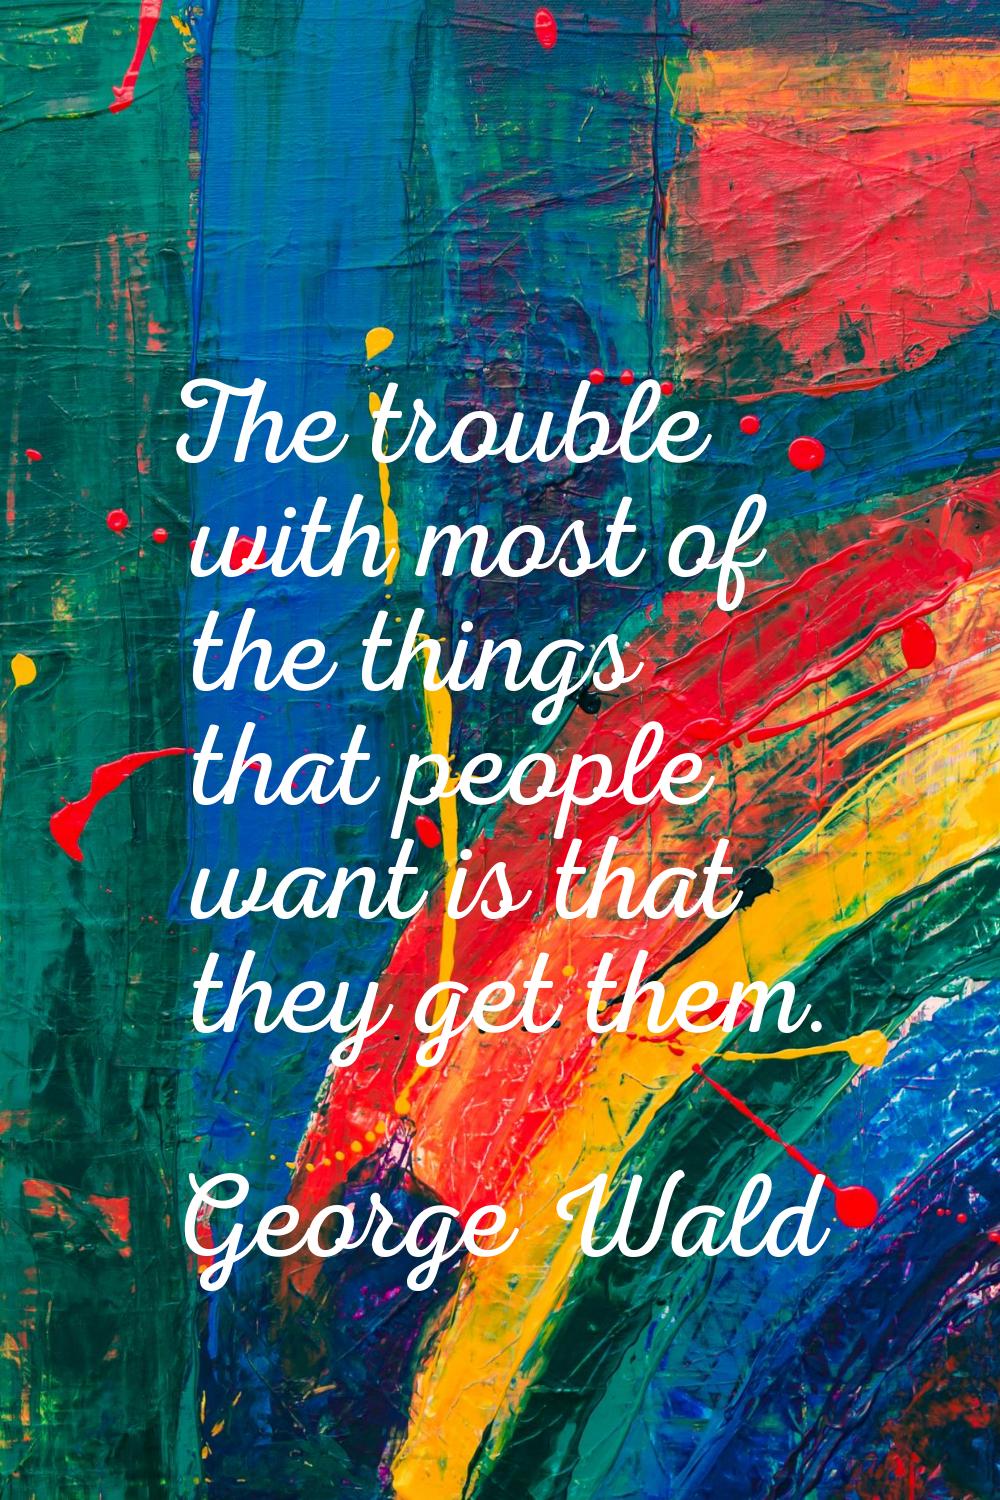 The trouble with most of the things that people want is that they get them.